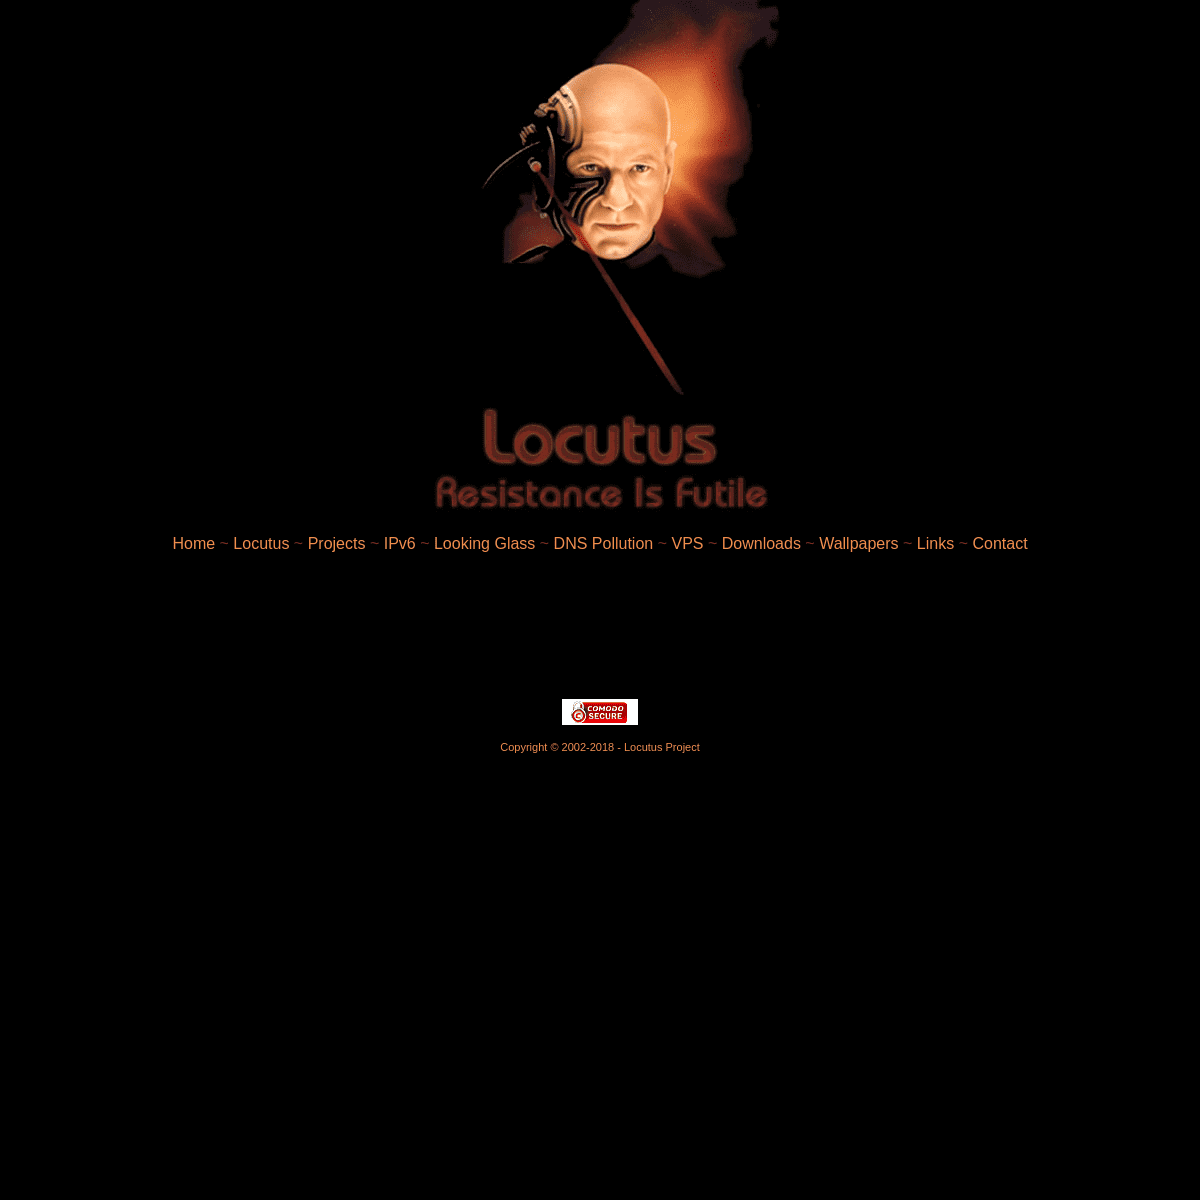 A complete backup of https://locutus.be